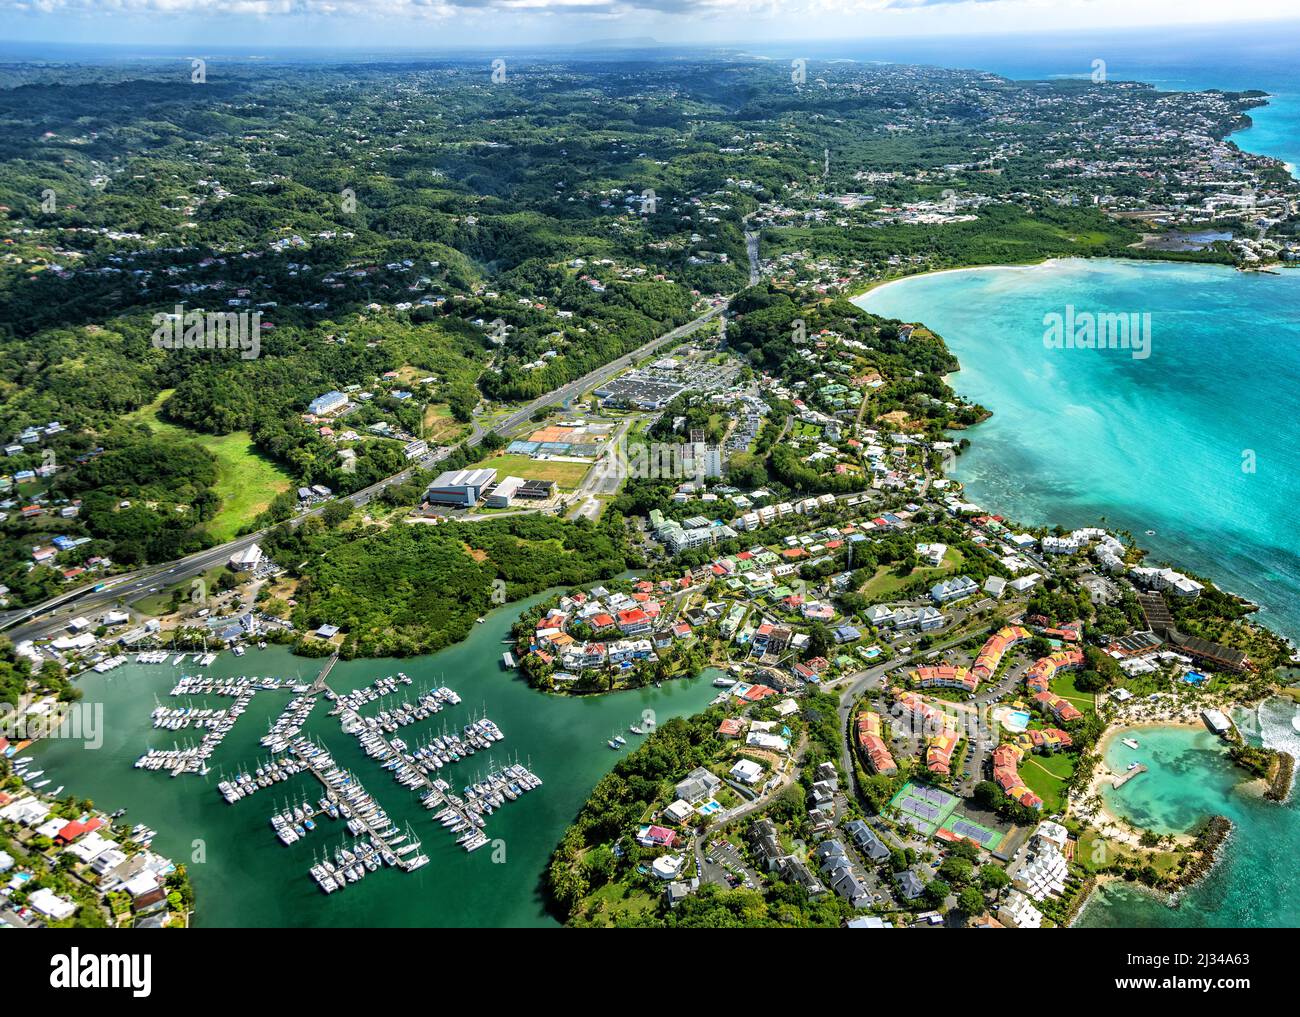 Aerial view of Marina Bas-du-Fort, Pointe-à-Pitre, Grande-Terre, Guadeloupe,  Lesser Antilles, Caribbean Stock Photo - Alamy